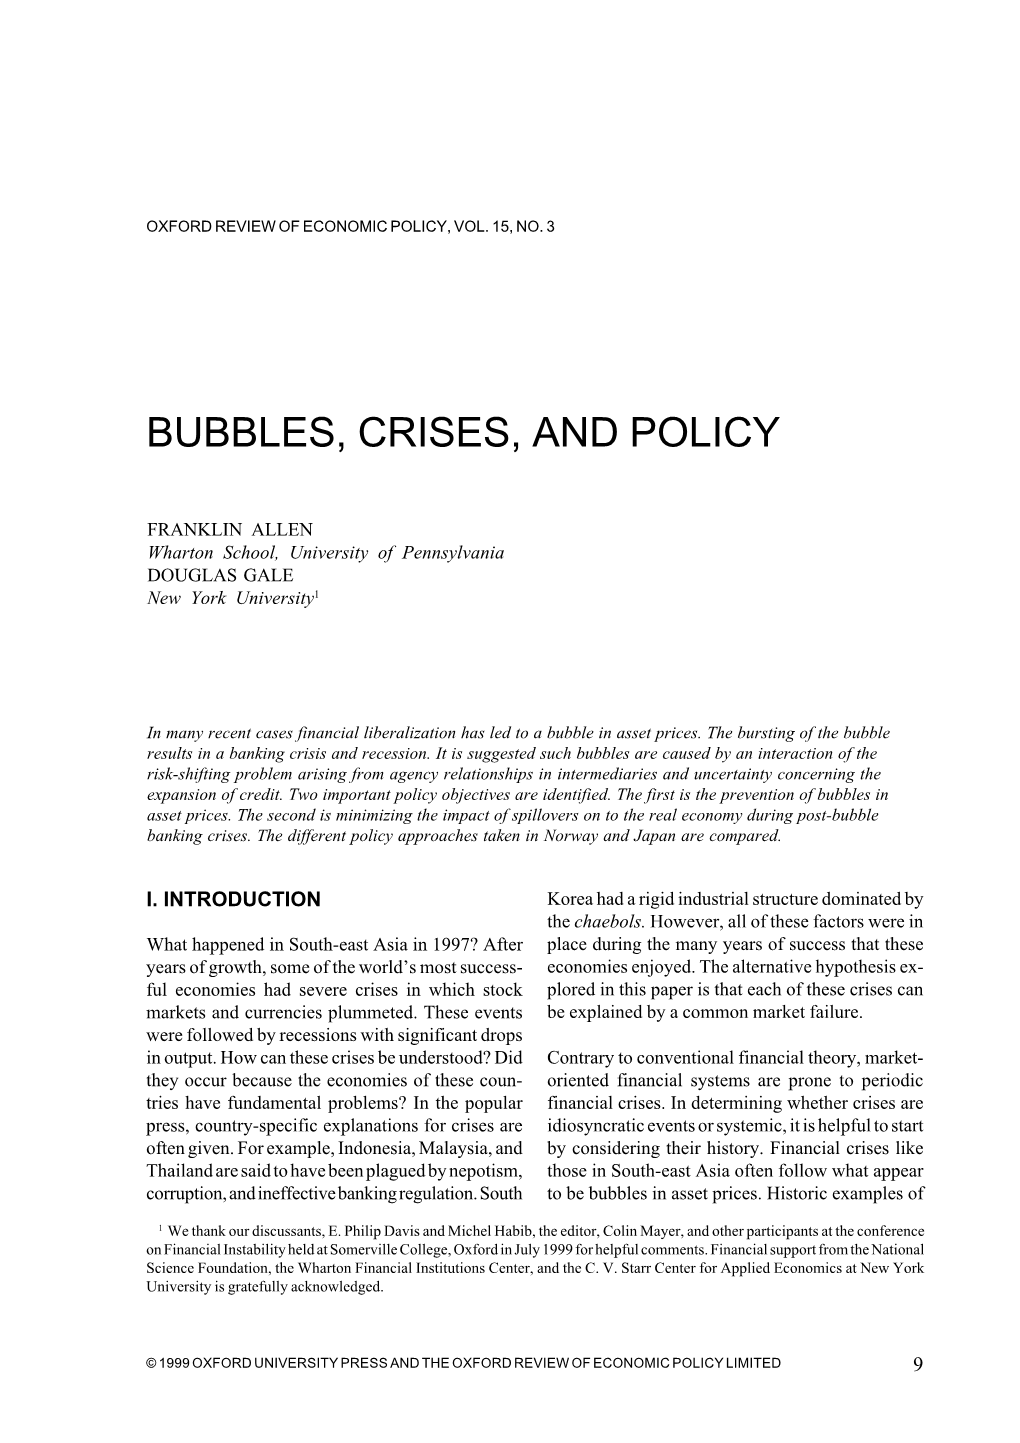 Bubbles, Crises, and Policy